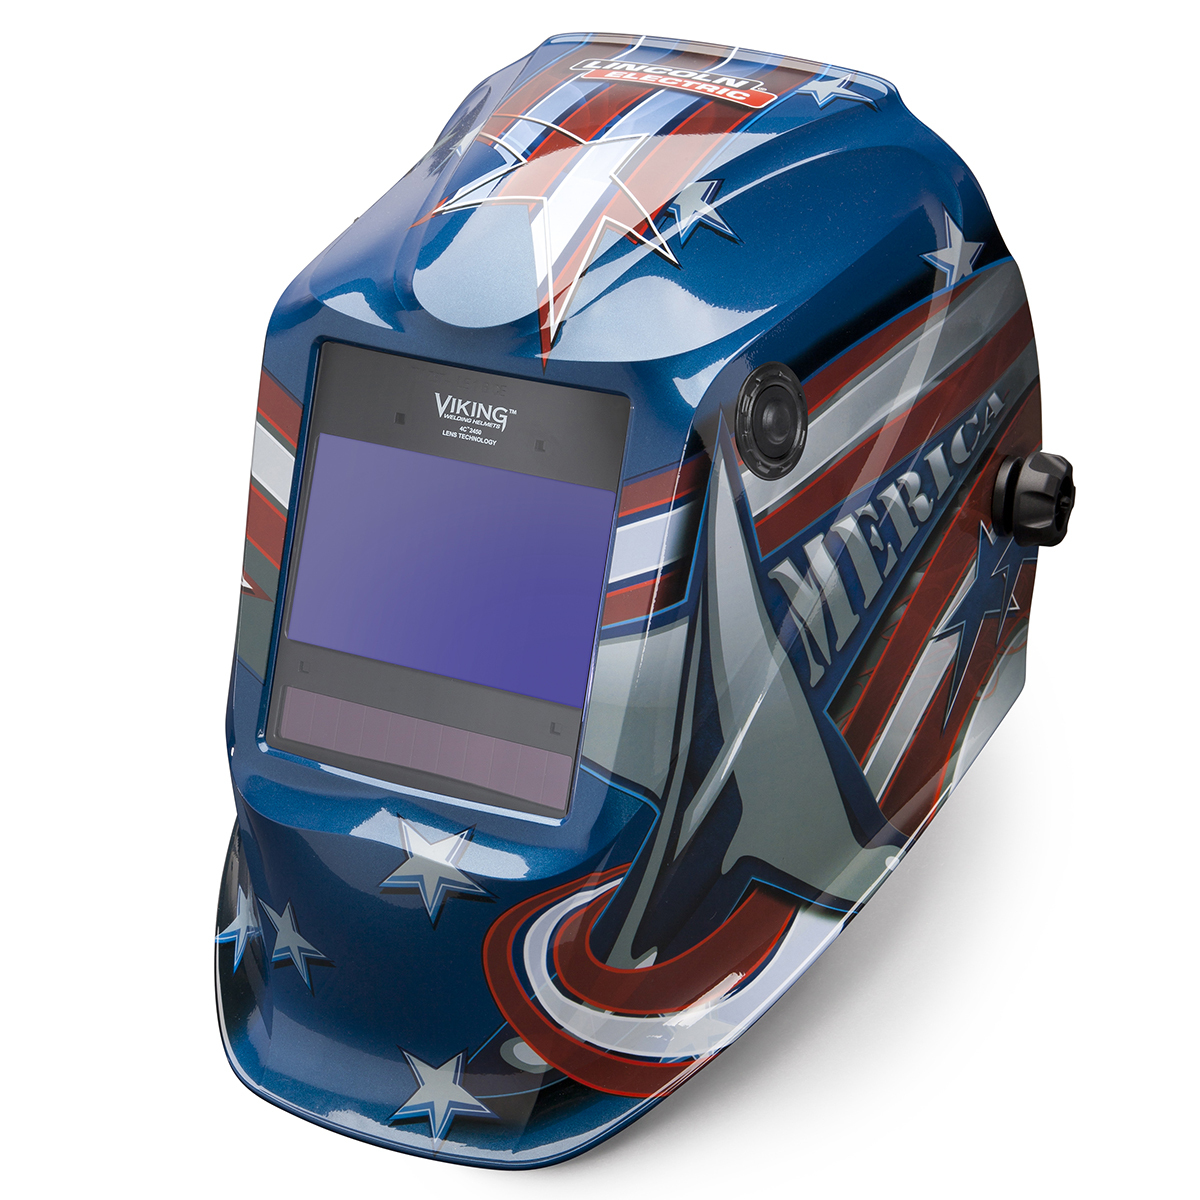 Lincoln Electric® VIKING® 2450 Red/White/Blue Welding Helmet With Variable Shades 5 - 13 Auto Darkening Lens, 4C® Lens Technolog